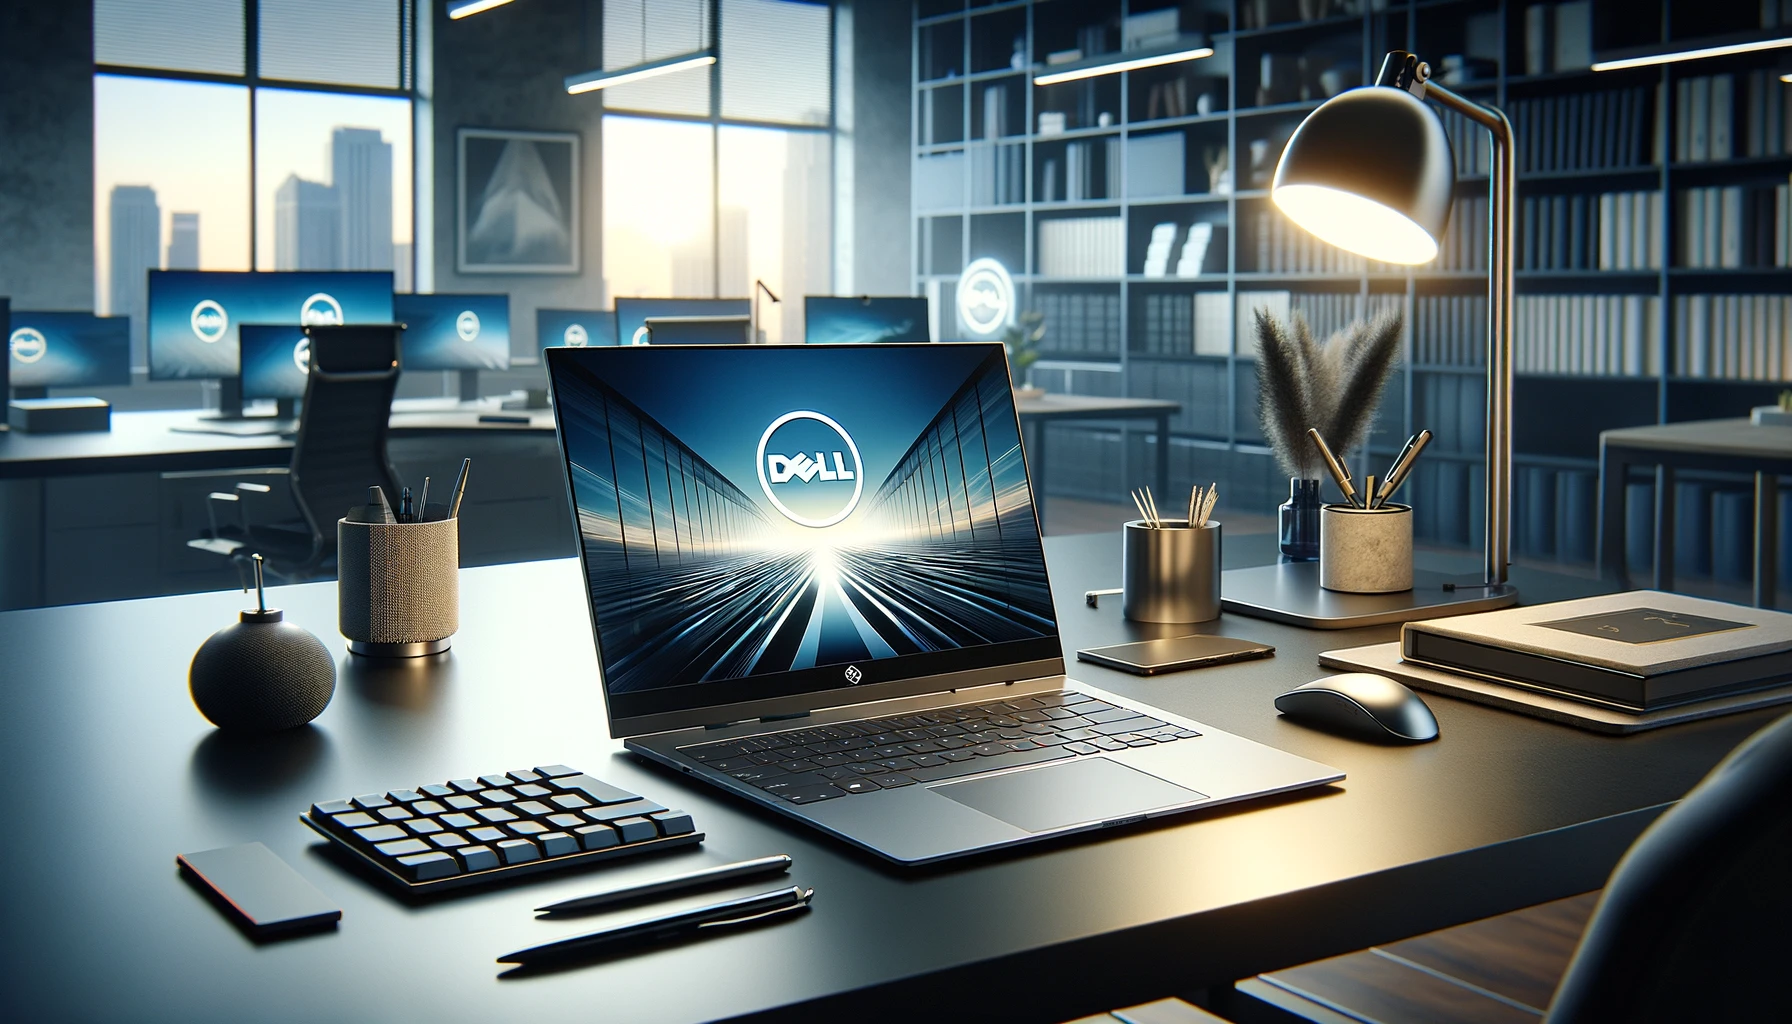 The image above features a stock photo of a Dell XPS laptop set in a professional office environment, highlighting a modern and sophisticated workspace designed for high performance and productivity.